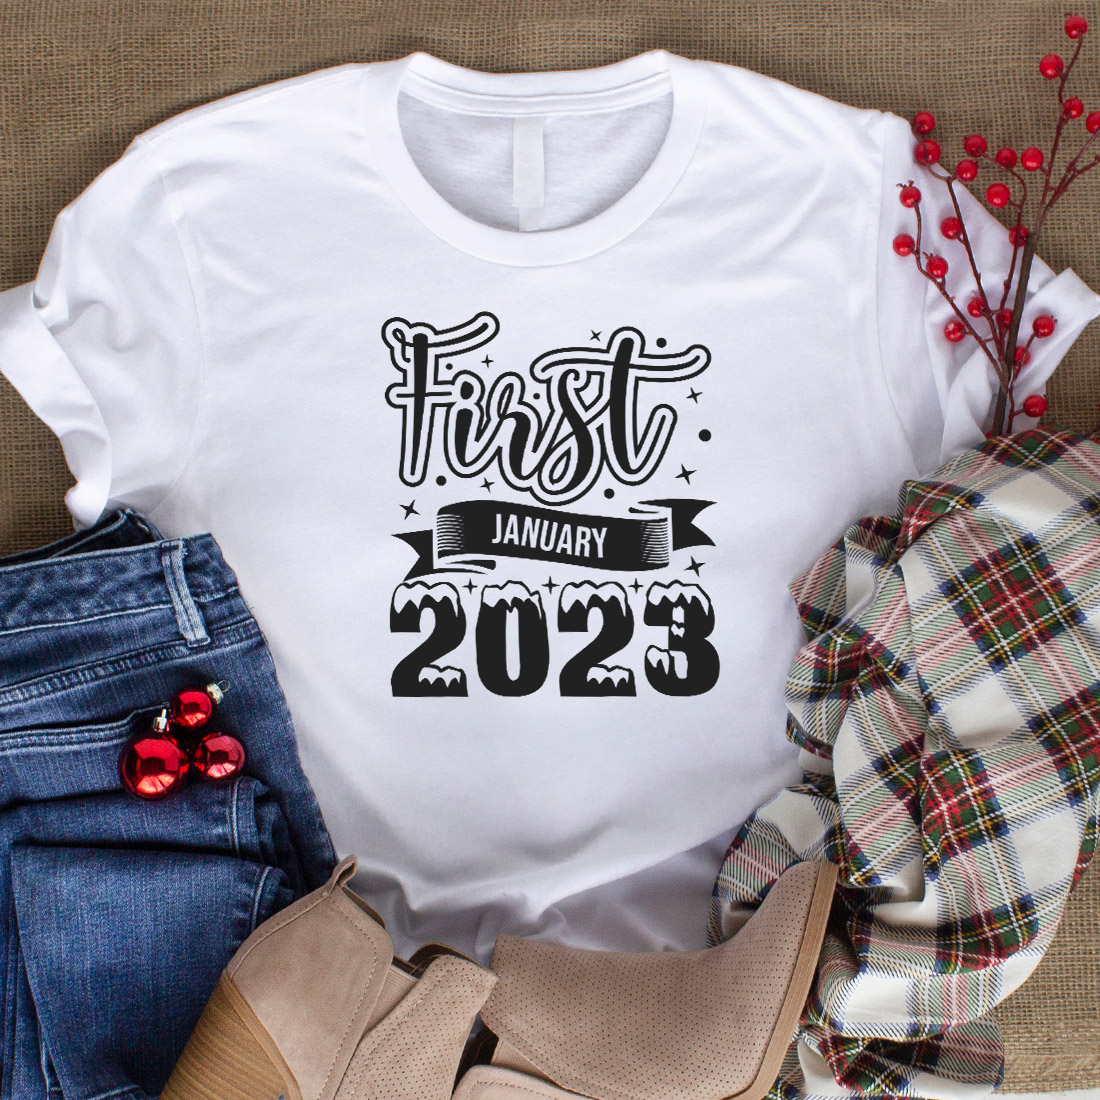 Image of a white t-shirt with a charming slogan First January 2023